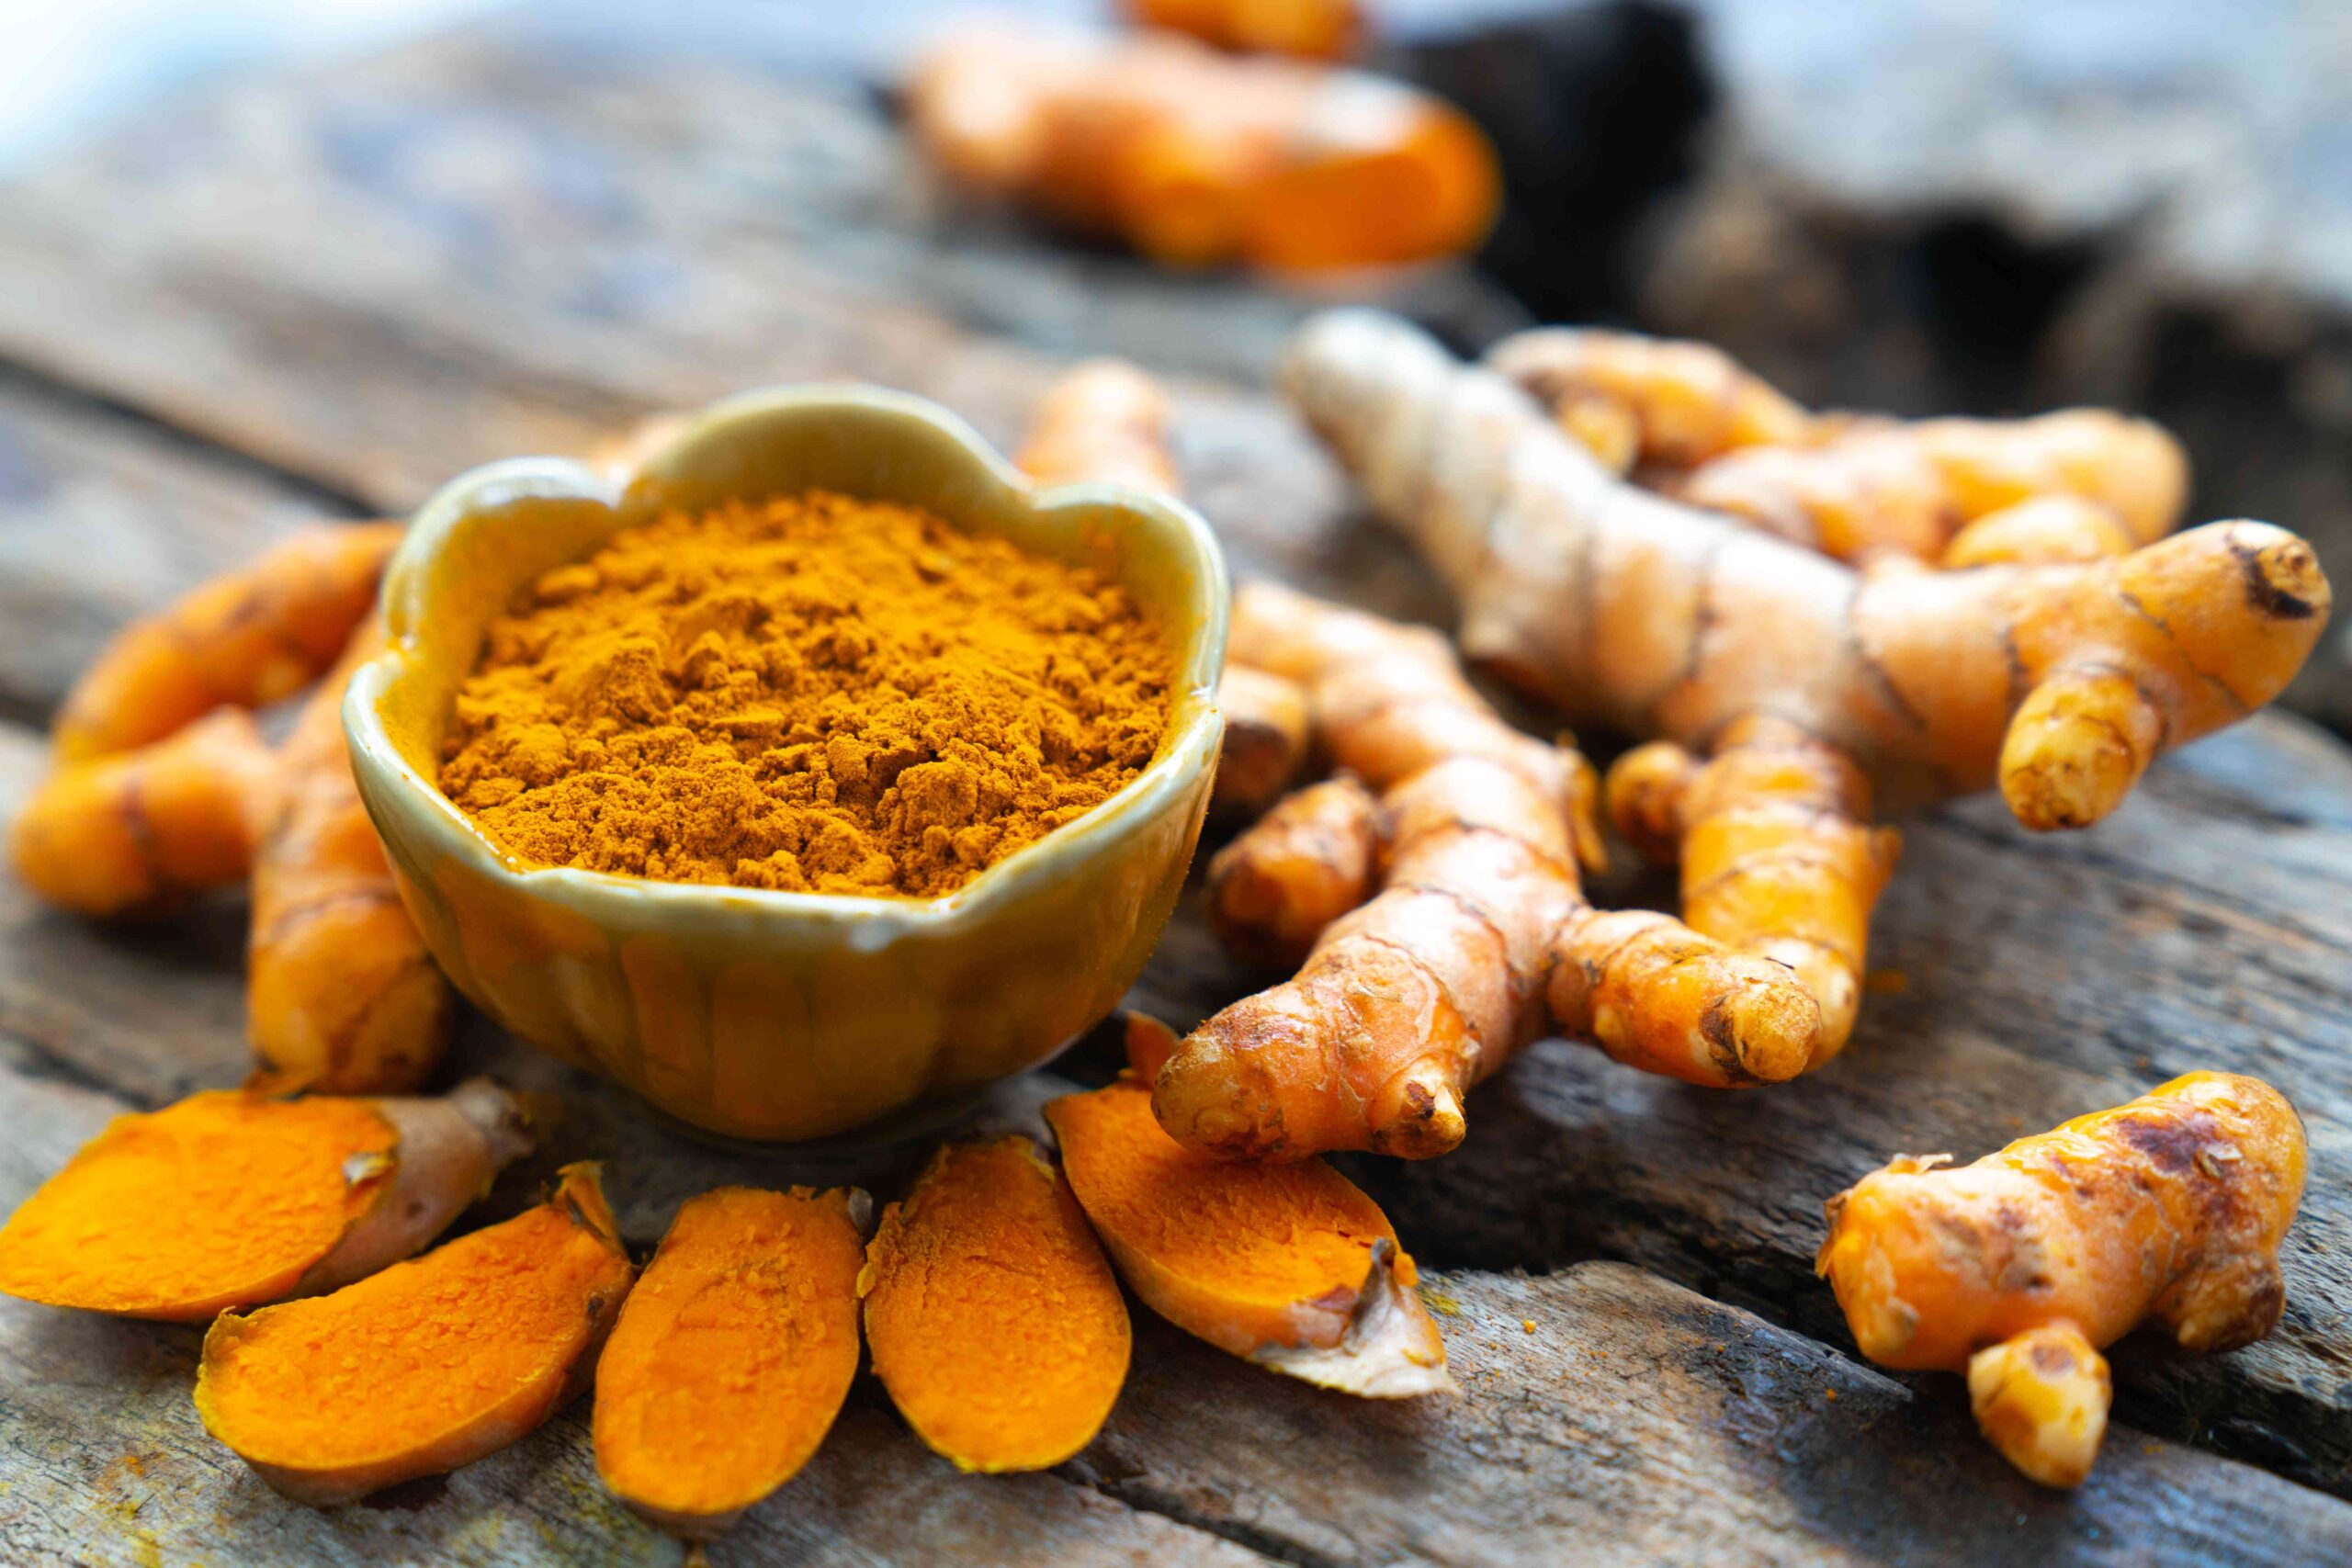 You Should Know All benefits Of Turmeric For Men’s Health